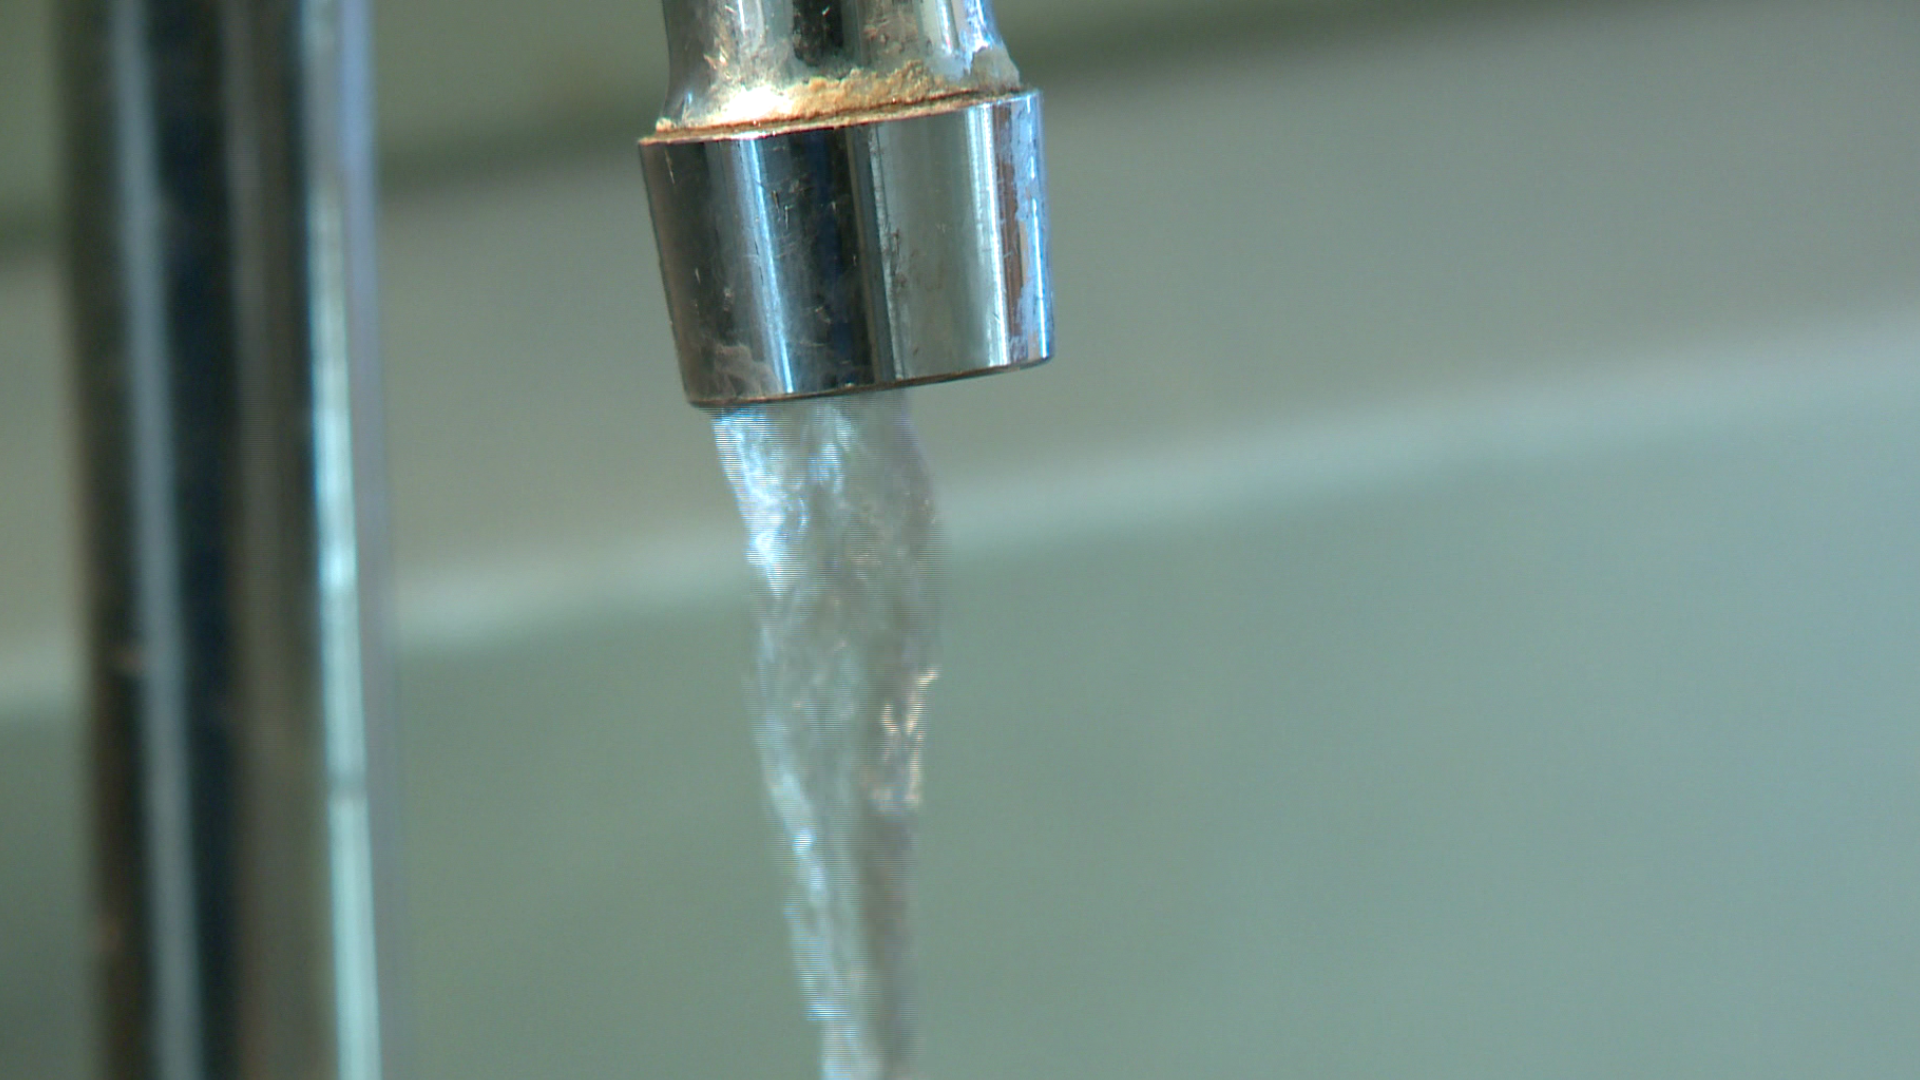 The City of Lewiston issued a boil water order for city water customers after a reservoir failure.